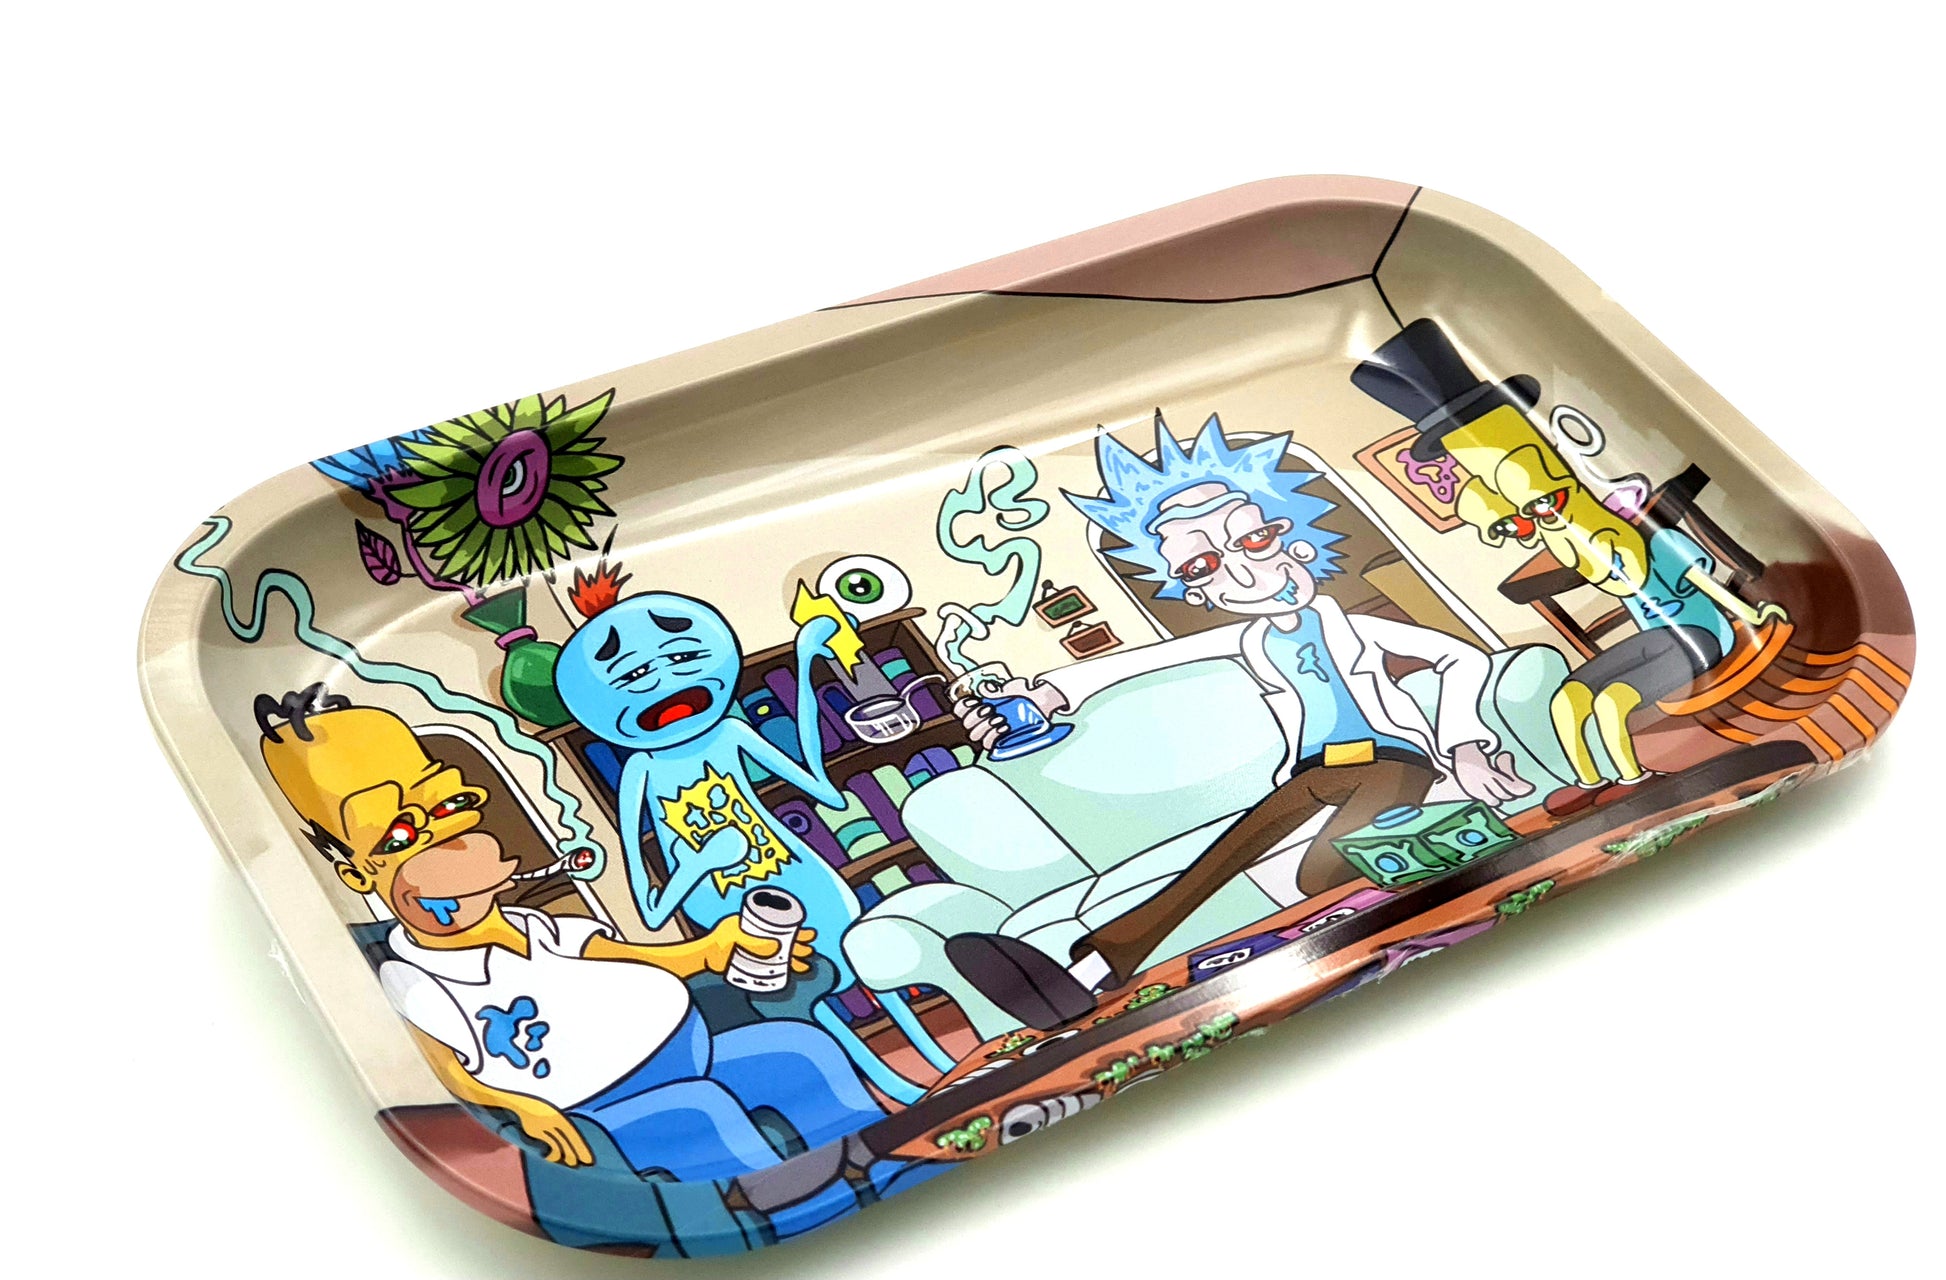 R&M Limited Edition Design Rolling Tray - Large - Bittchaser Smoke Shop